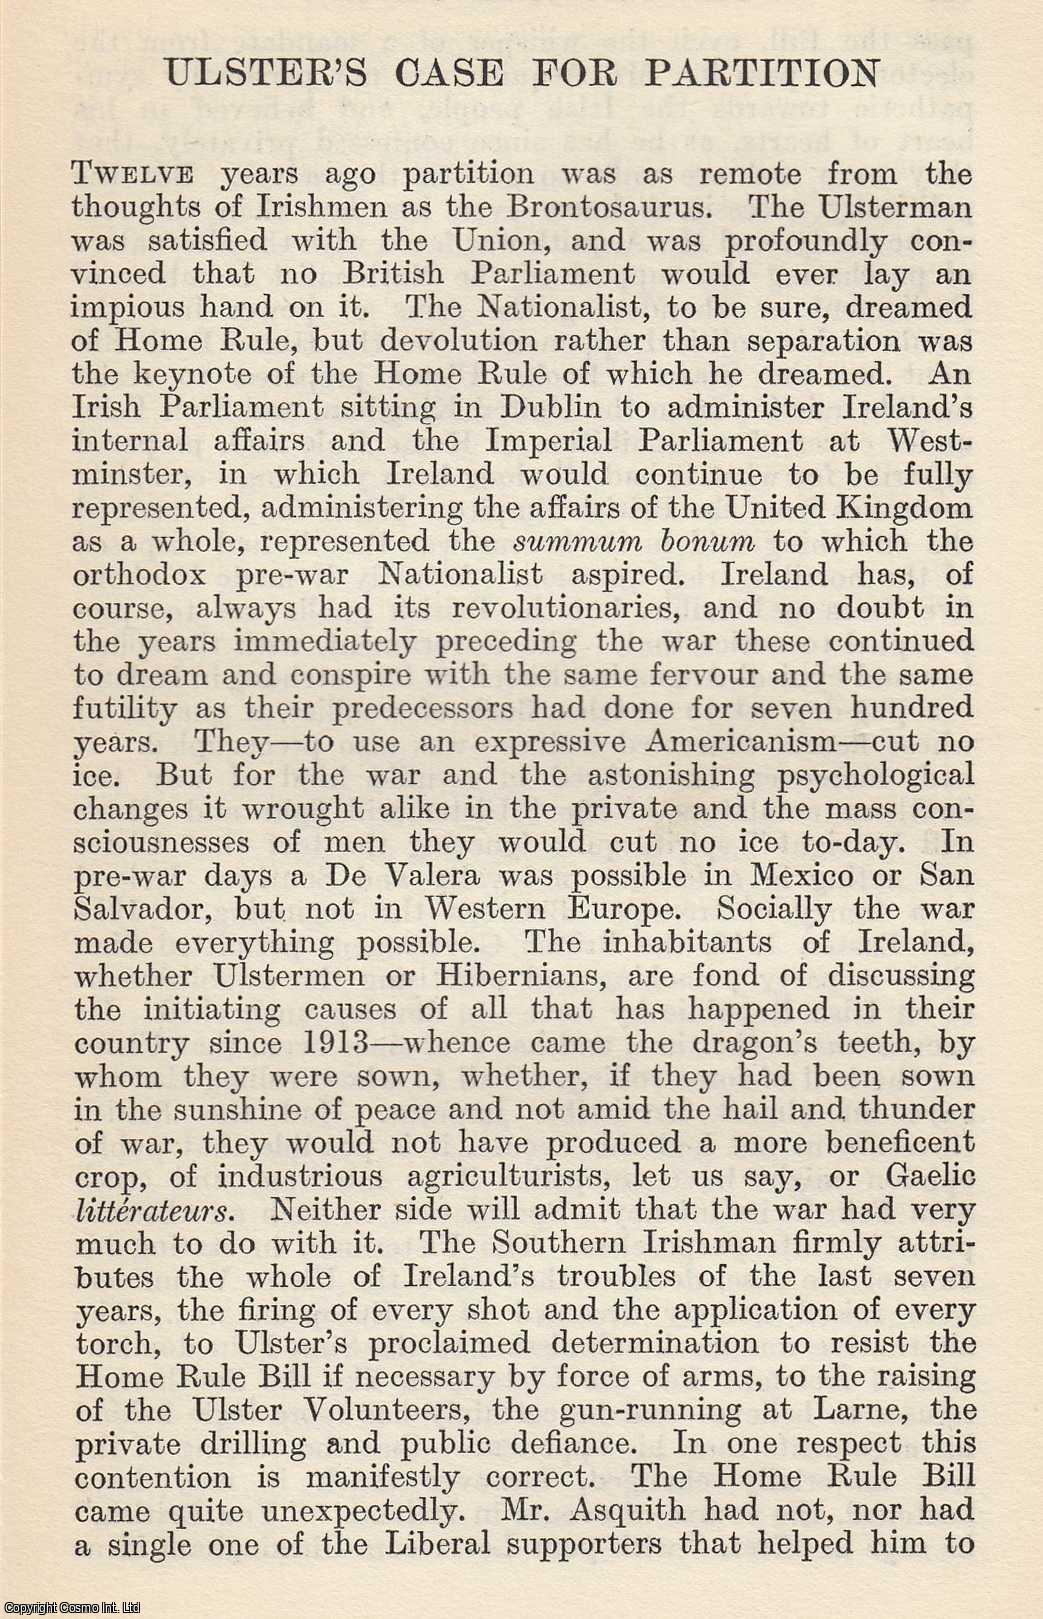 IRISH FREE STATE - Ulster's Case for Partition. By C. H. Bretherton. An original article from The National Review, 1923.